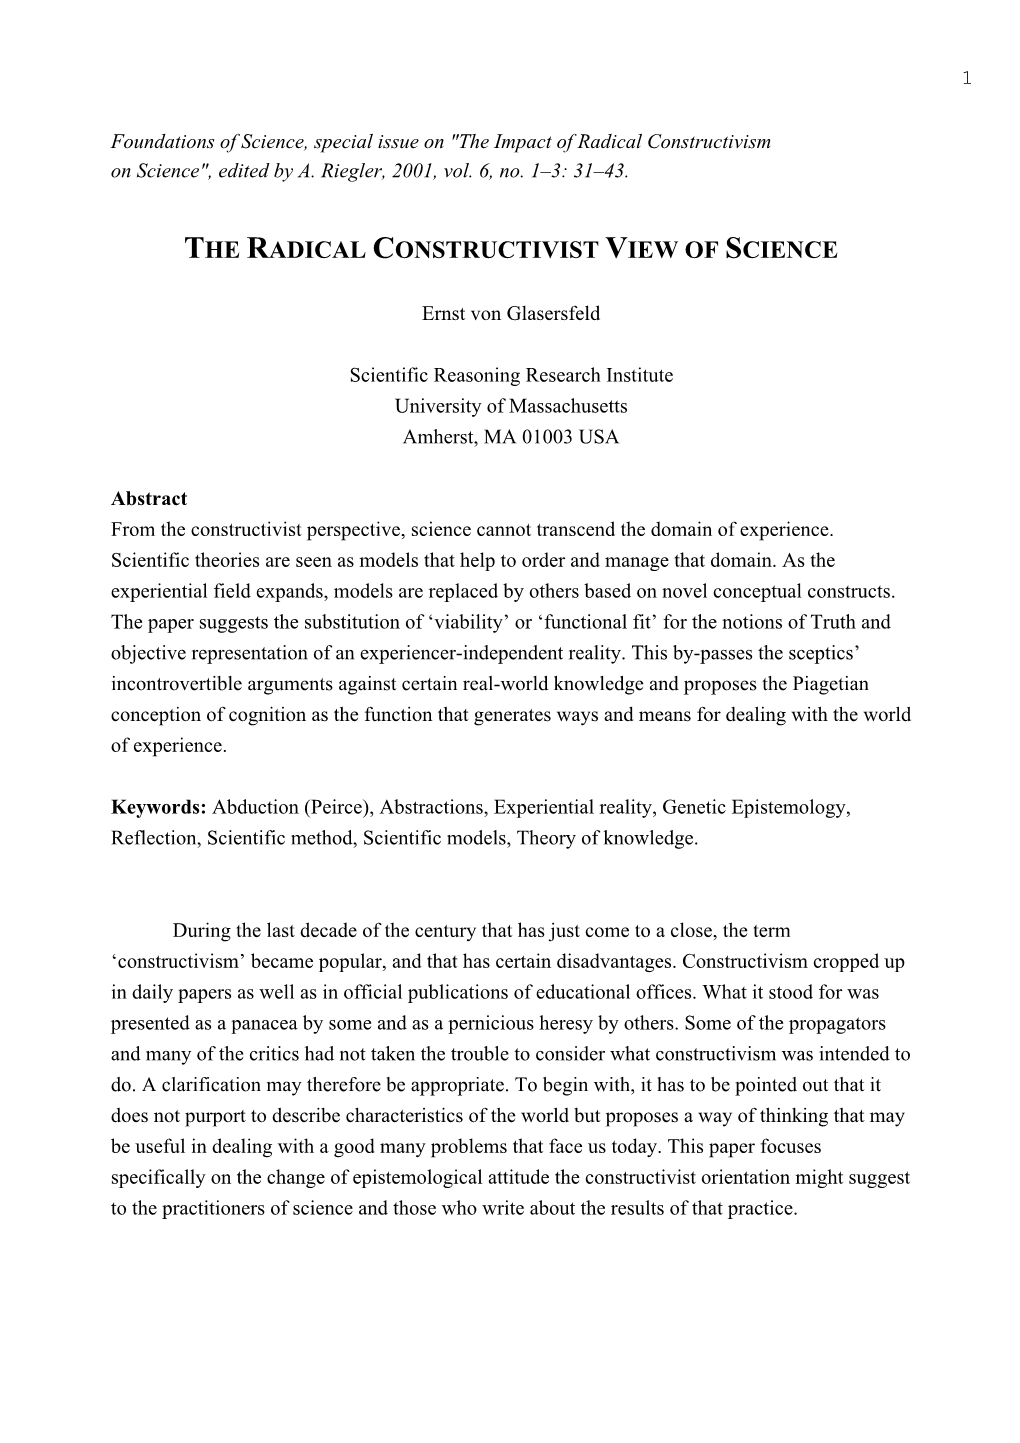 The Radical Constructivist View of Science